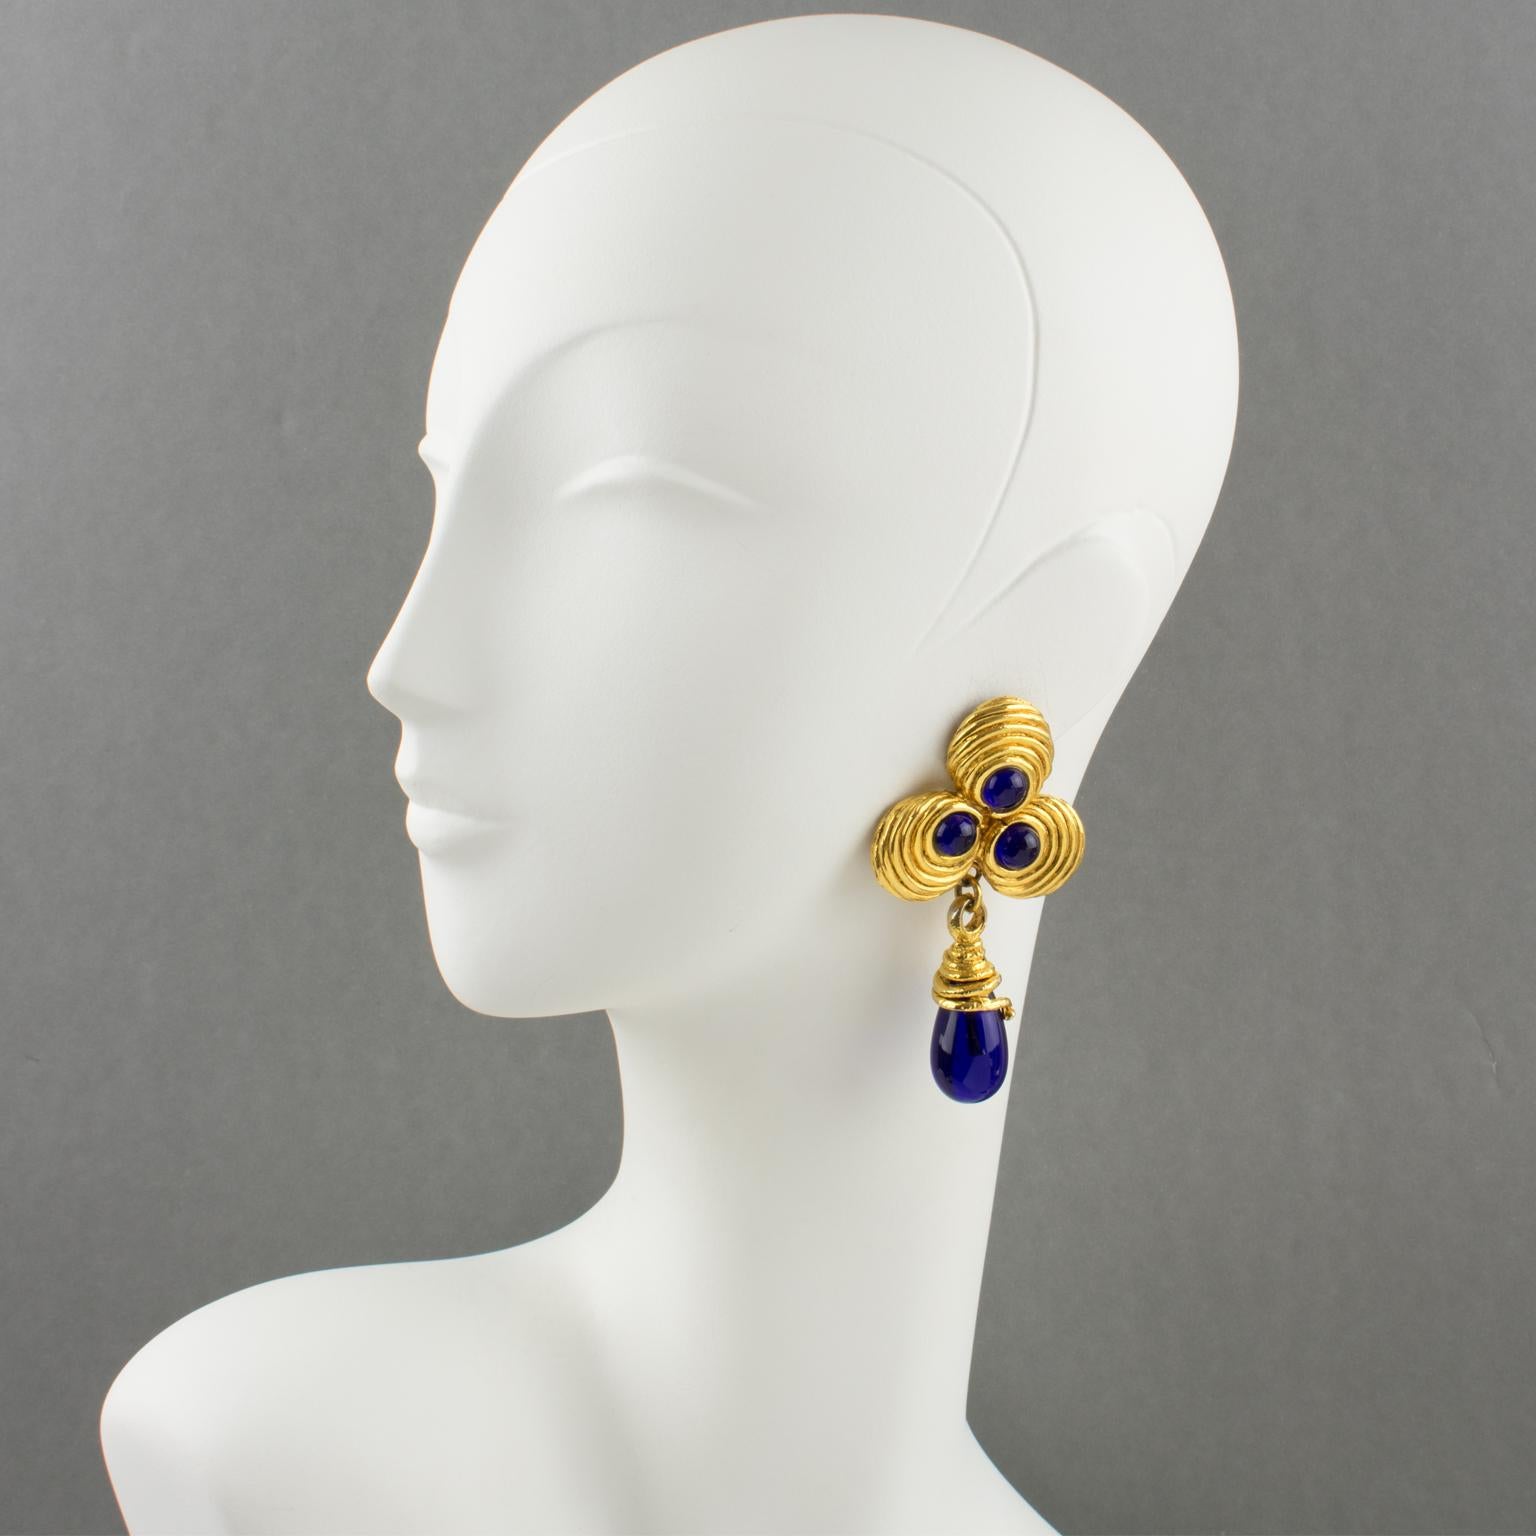 Ultra-chic Mercedes Robirosa Paris signed clip-on earrings. Oversized dangling baroque style with clover and teardrop, gilt metal all textured compliment with cobalt blue poured glass cabochons and drop. Signed at the back with the brand